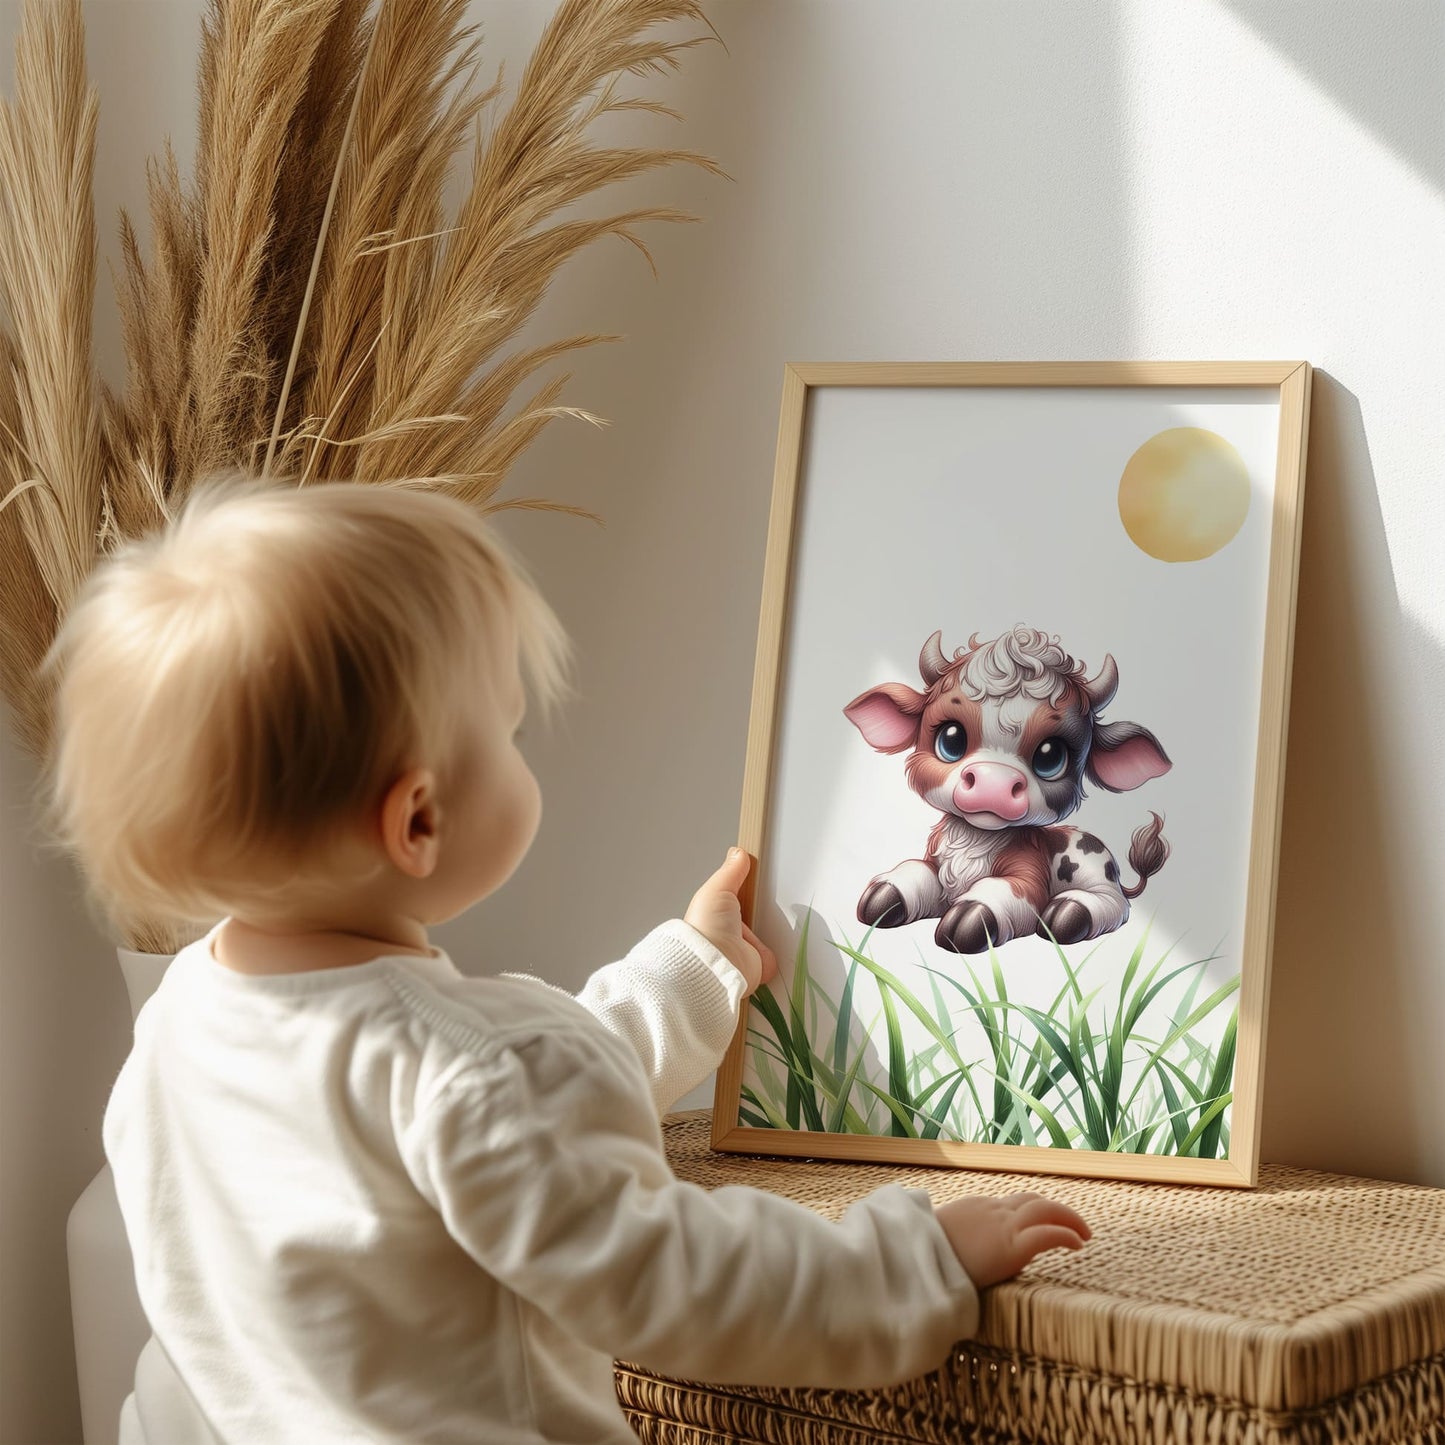 Set of four A4 prints featuring baby farm animals - cow, pig, chick and lamb. The animals are depicted in a cartoony, bright style resembling coloured pencil drawings. Each print depicts grass along the bottom and a sun above the animal.